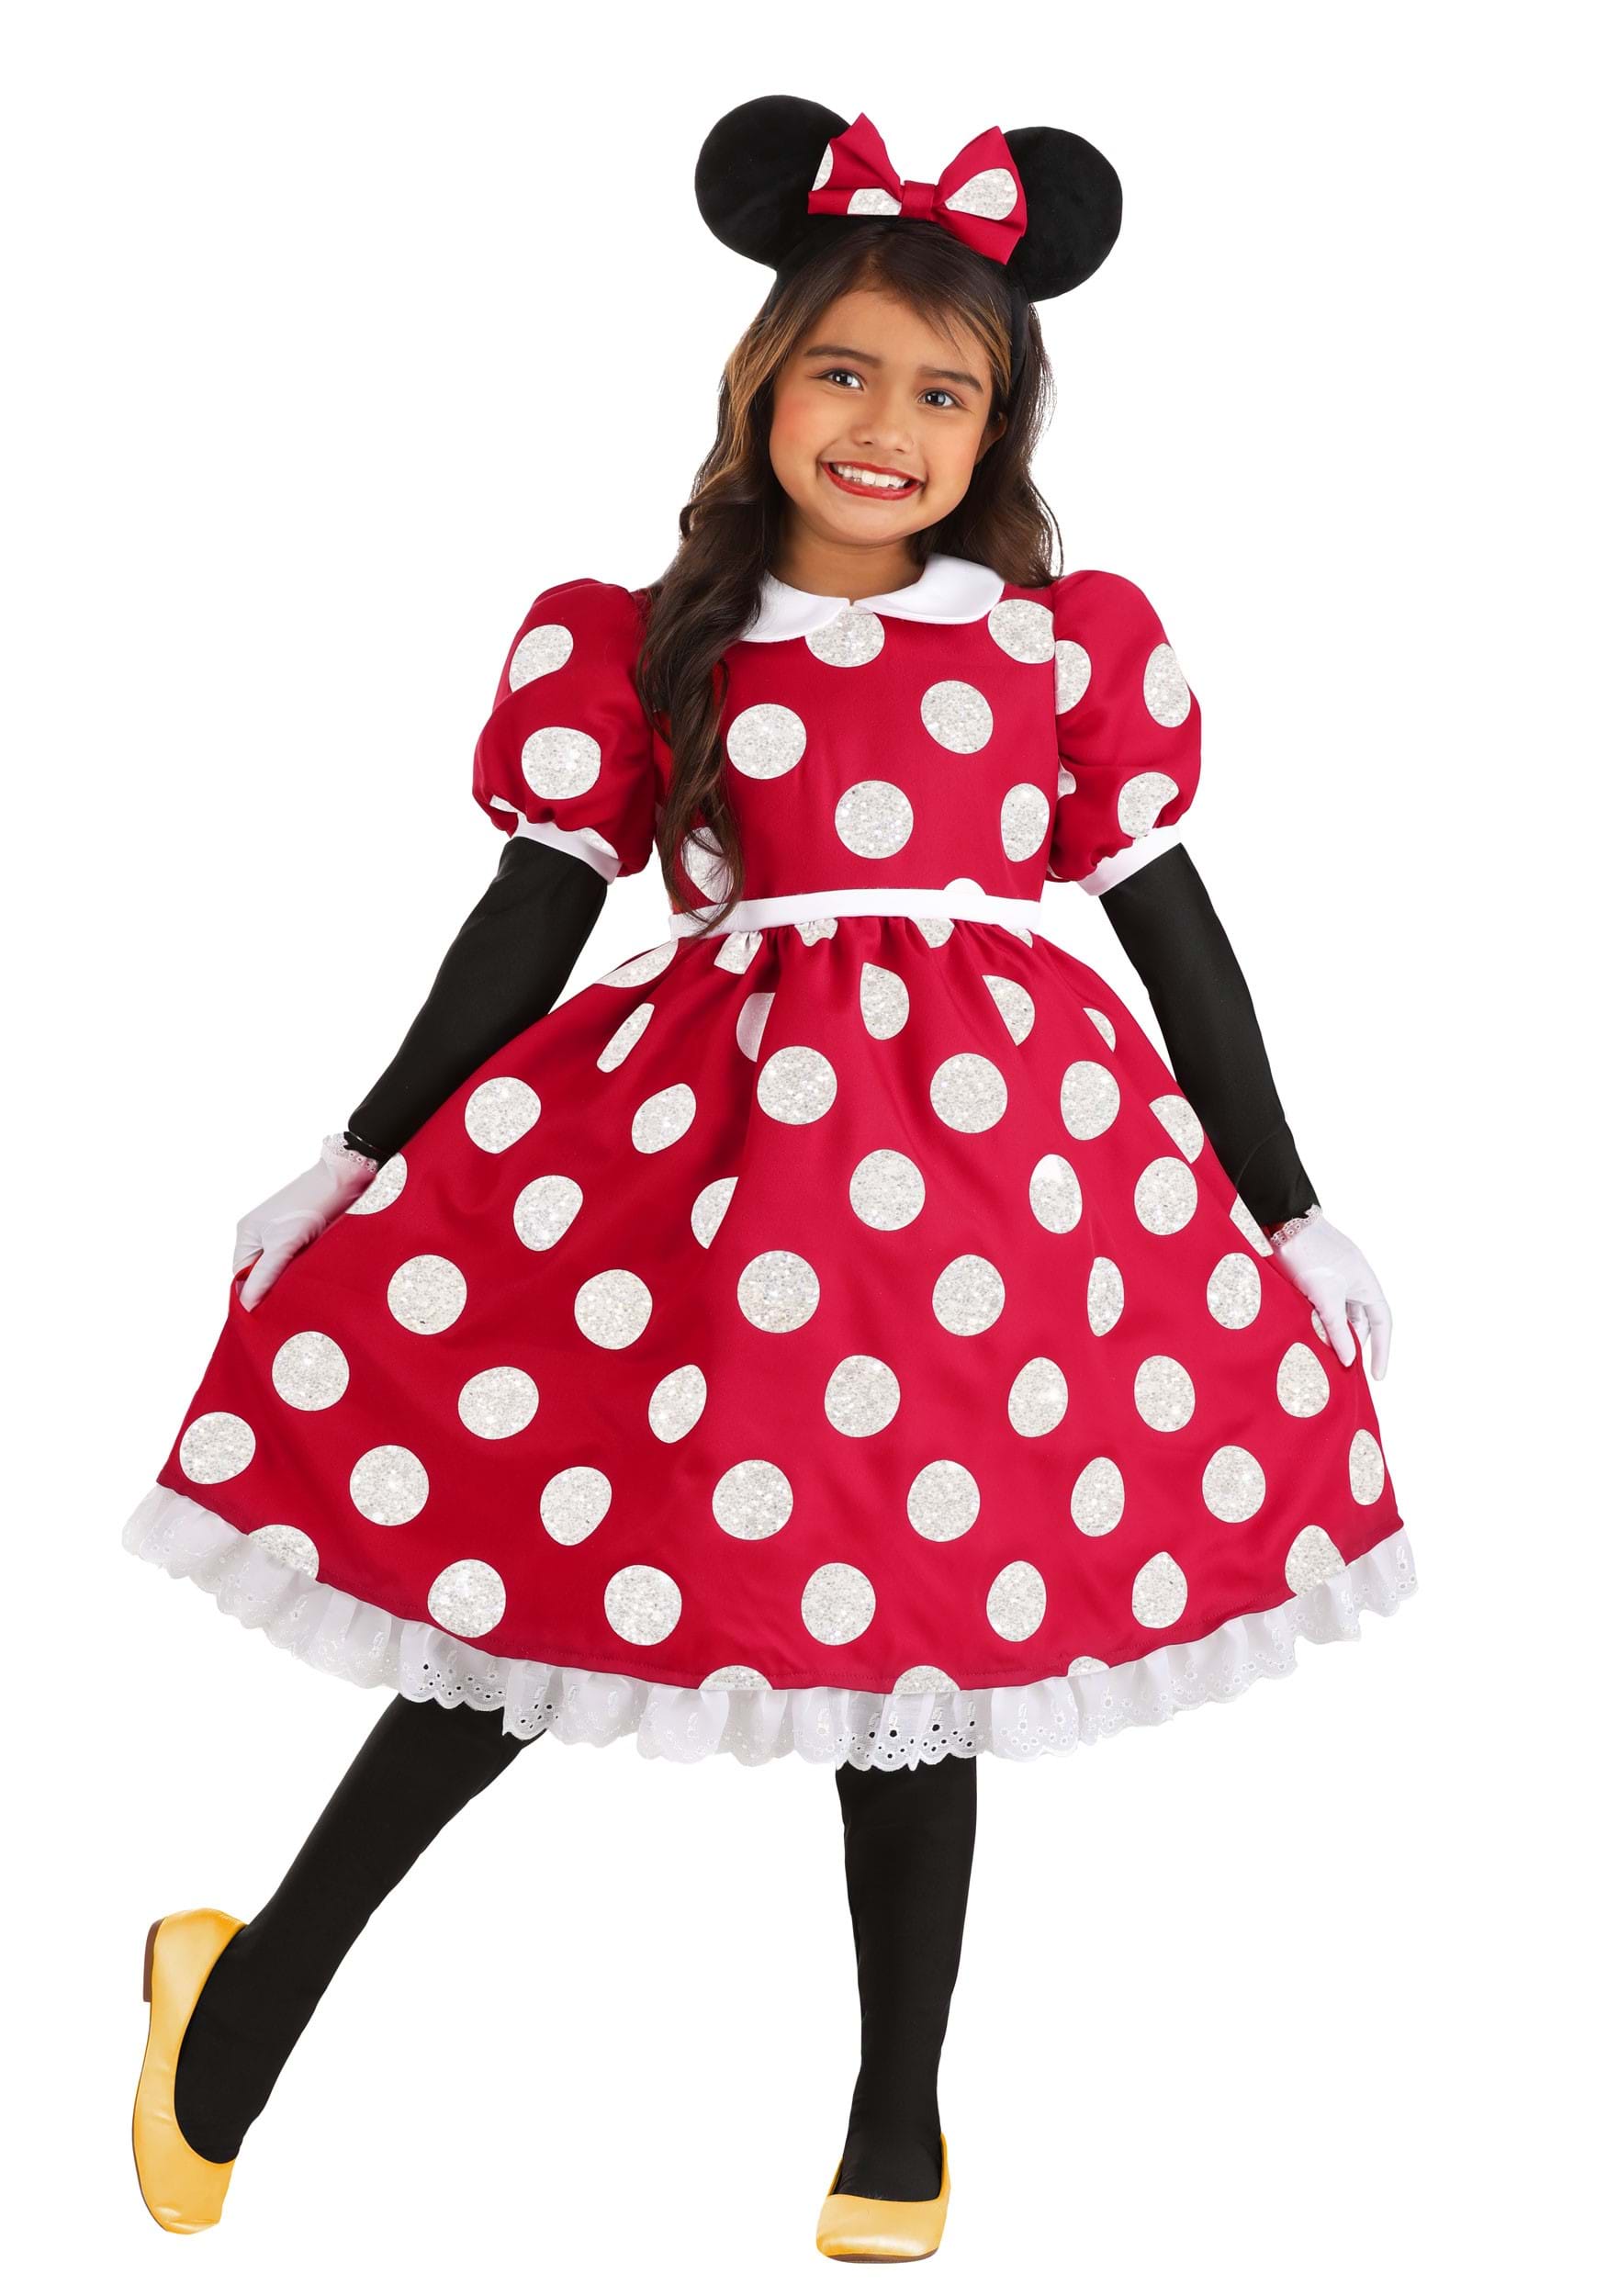 Photos - Fancy Dress Deluxe FUN Costumes  Disney Minnie Mouse Girl's Costume Black/Red/W 